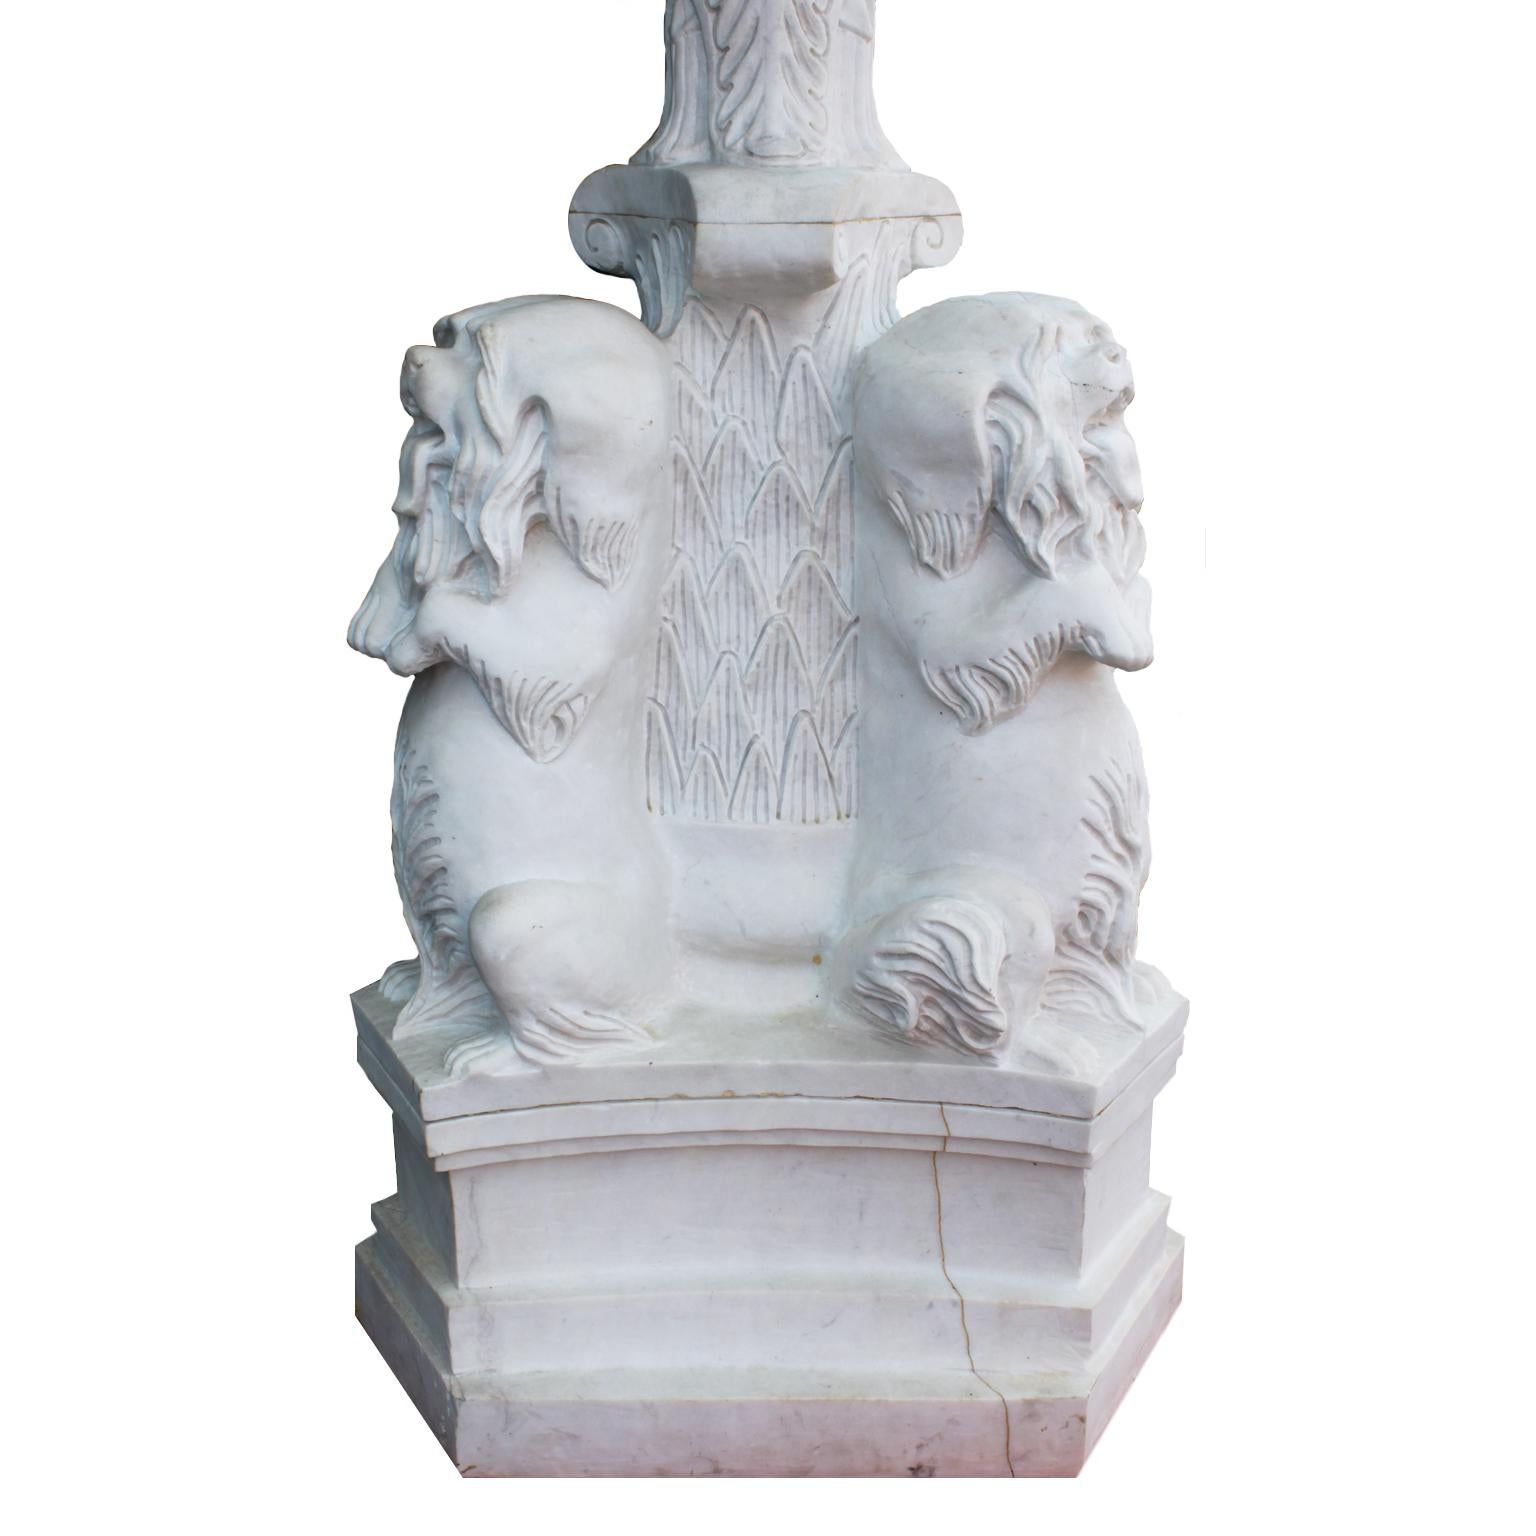 A Whimsical English 19th-20th century white marble figural fountain with dogs fountain. The Baroque Revival six-sided tripod marble base surmounted with three upright seated Yorkshire Terriers resting on a leaf and acanthus center stem, topped with